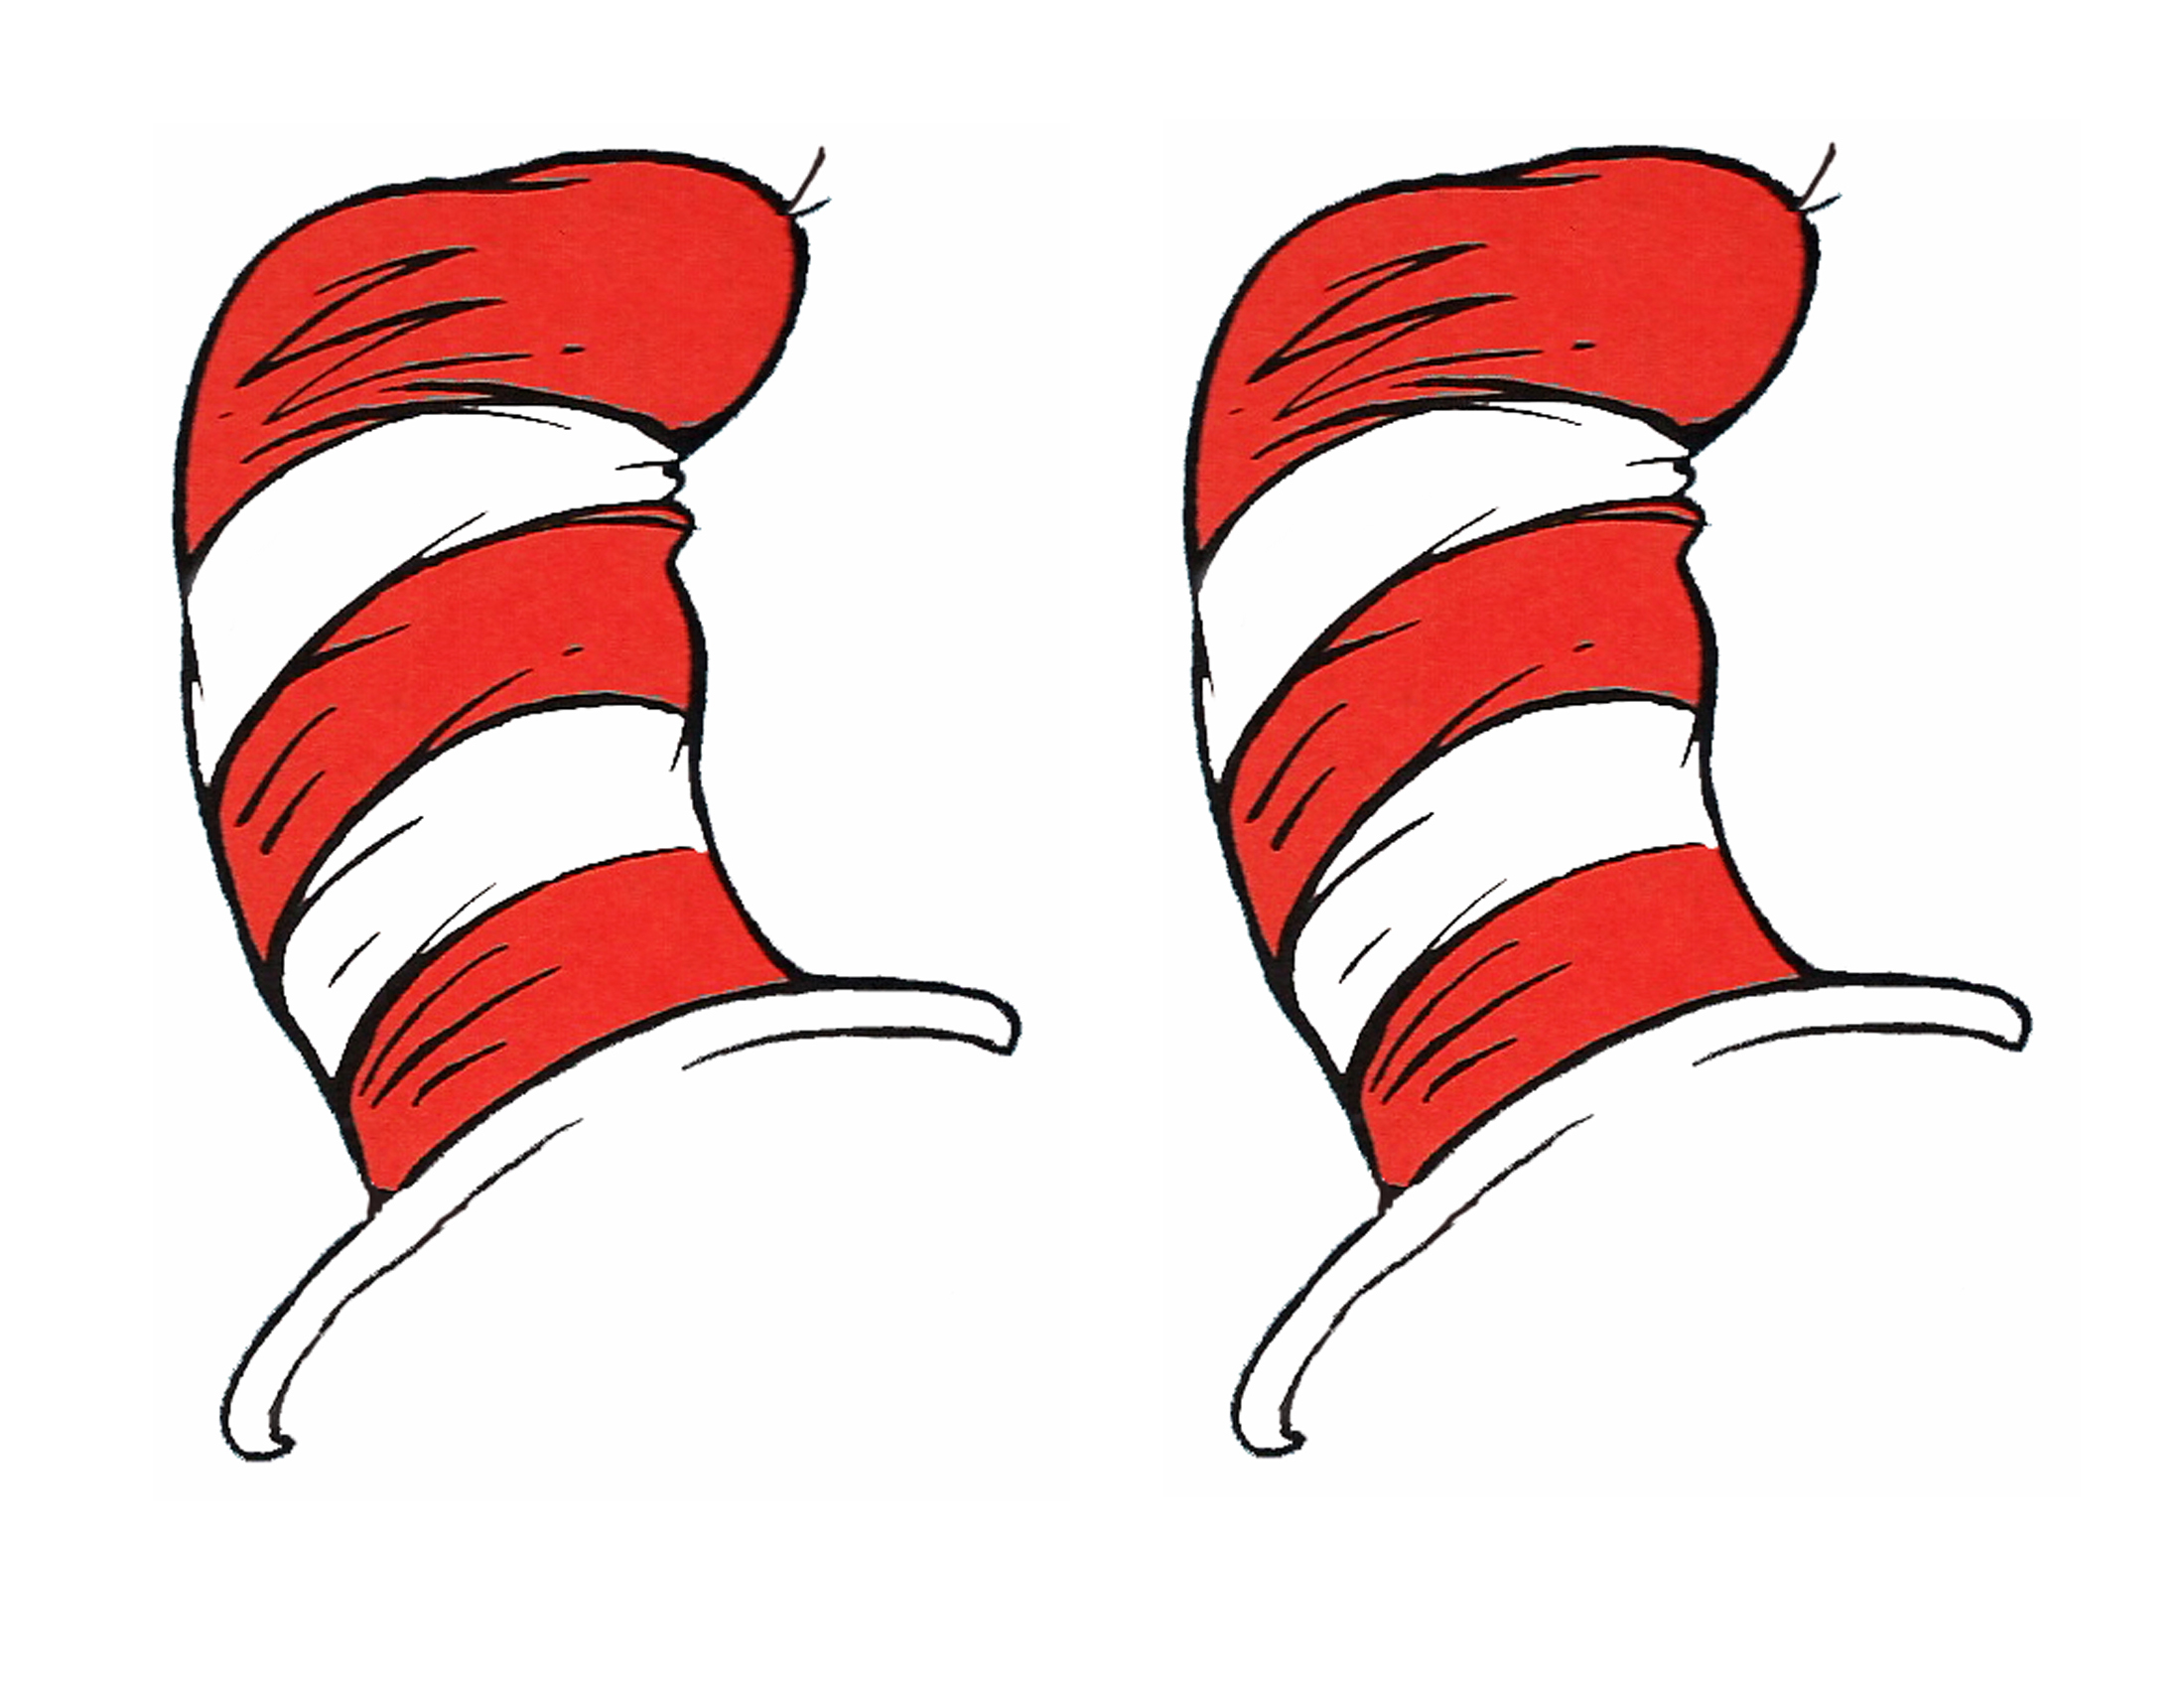 Cat In The Hat Bow Tie Template Cliparts.co